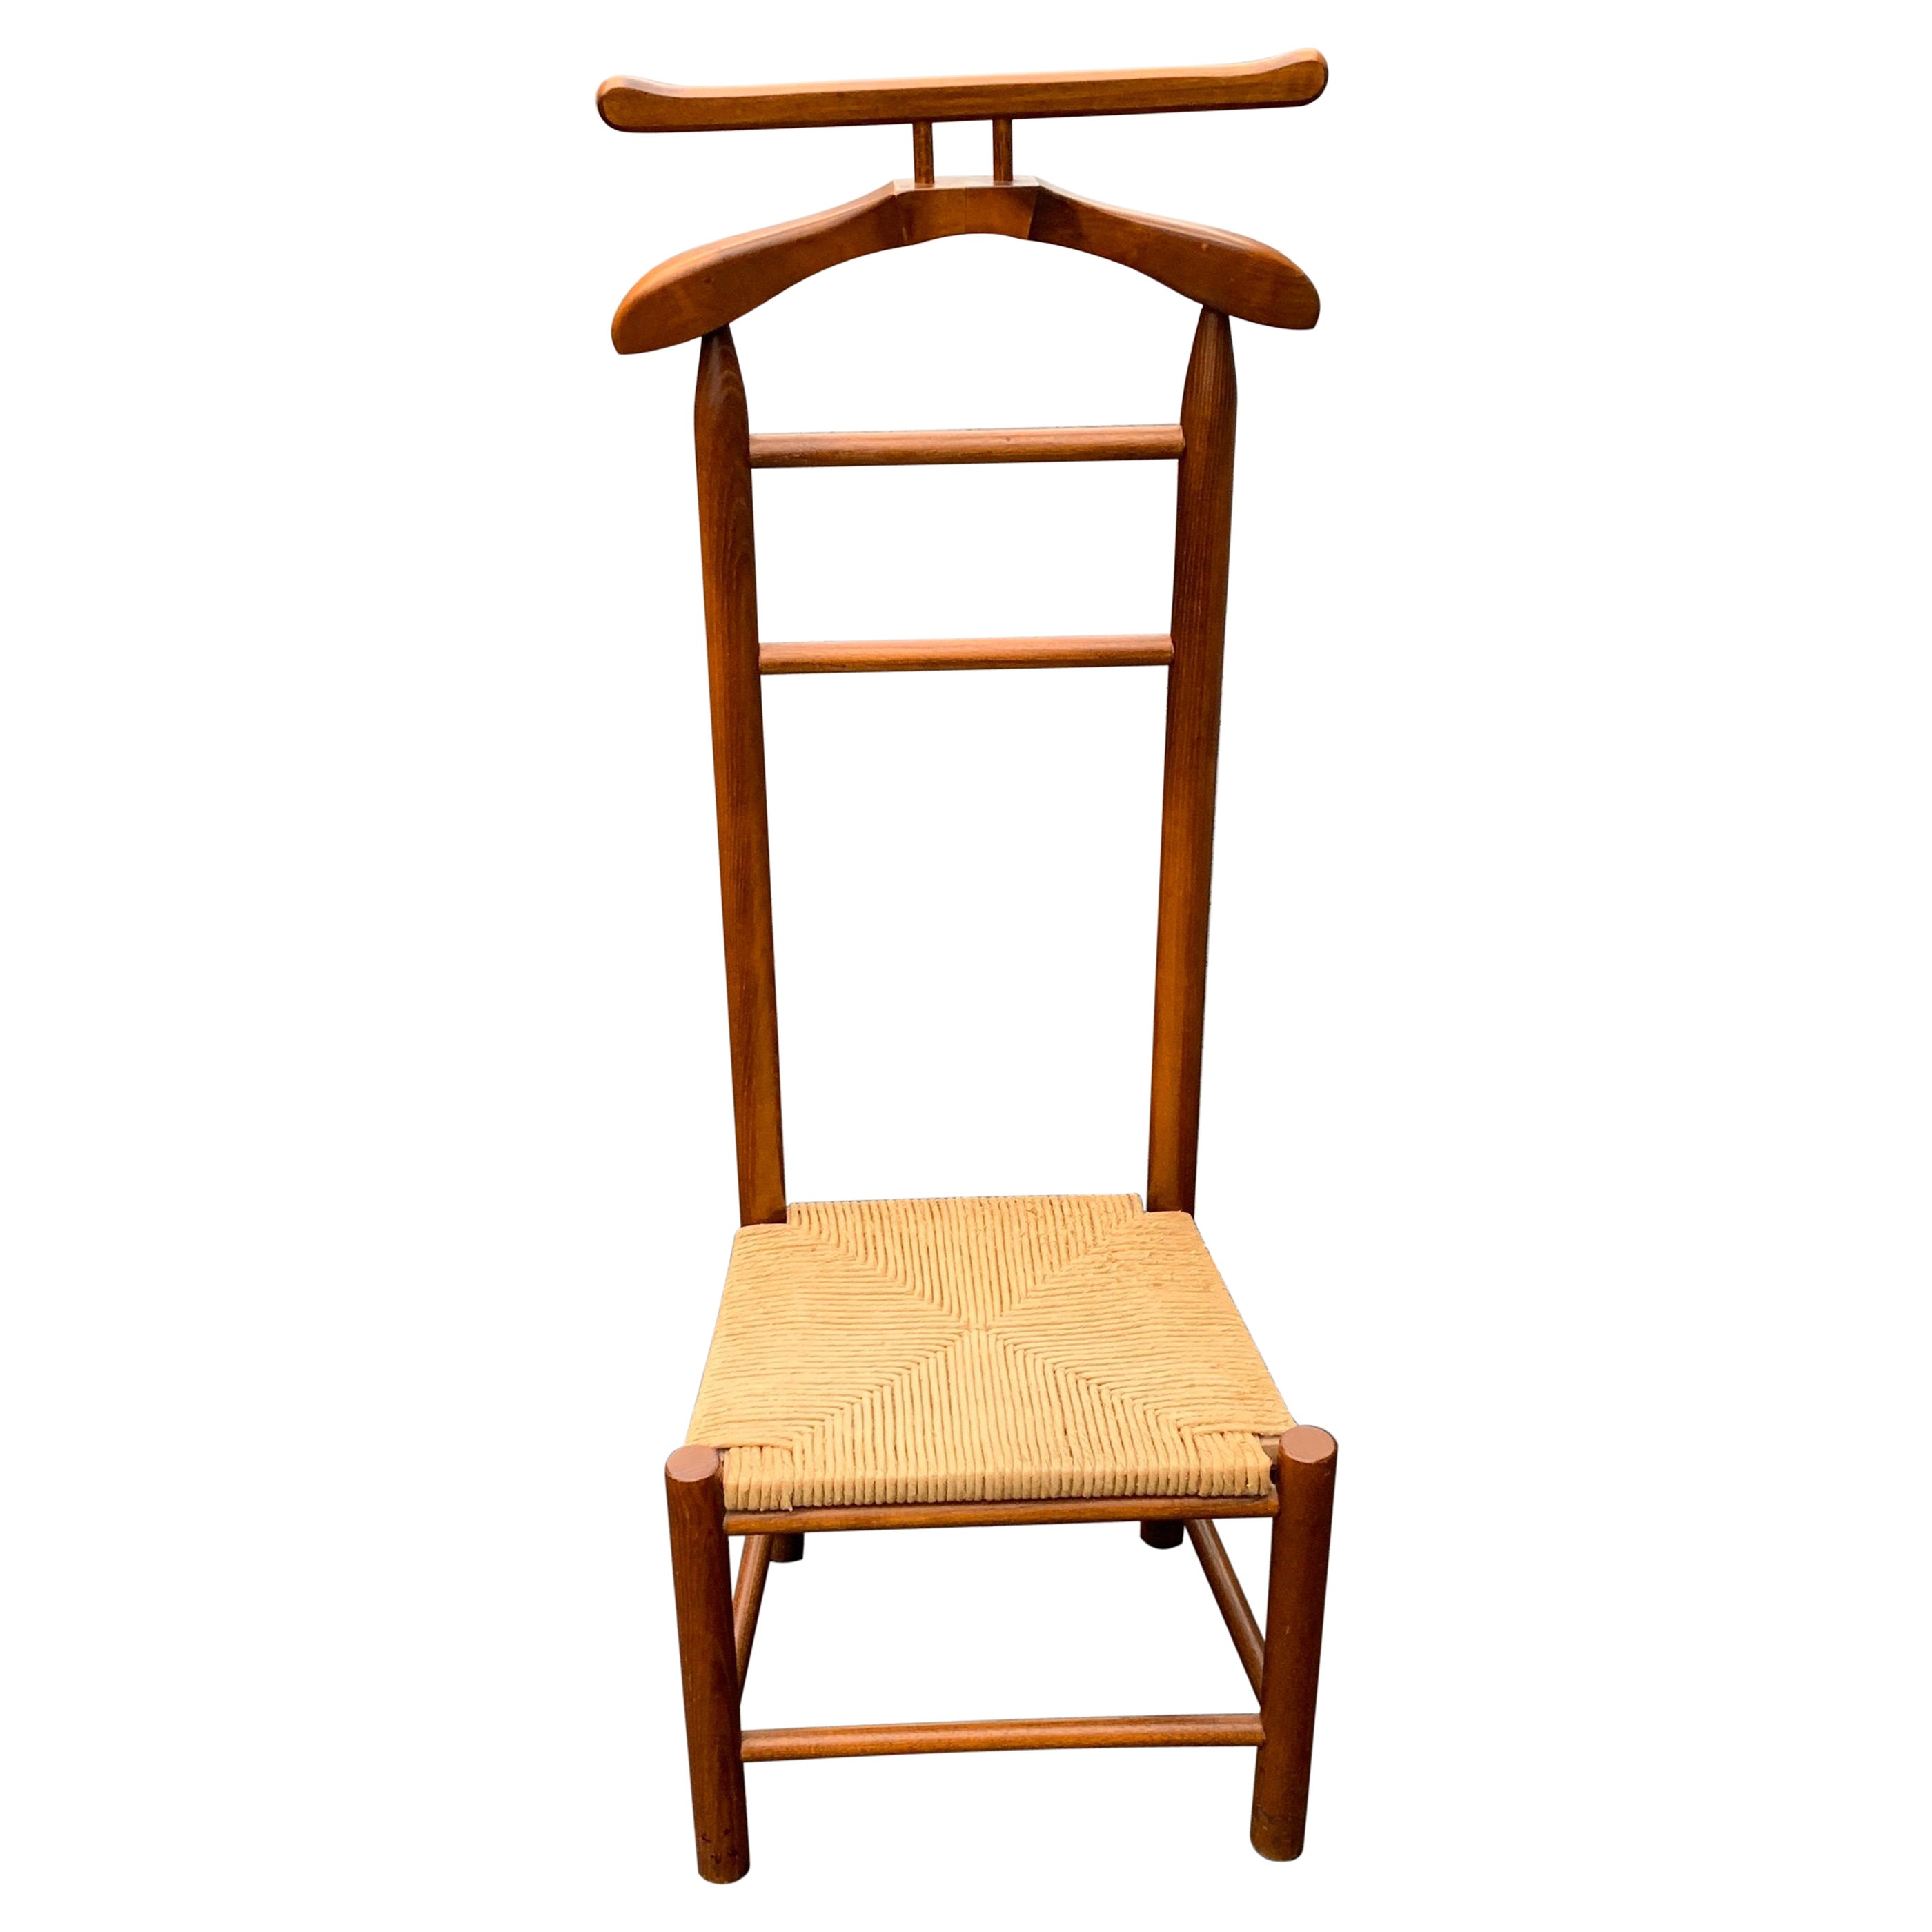 Vintage Men’s Valet Chair with Rush Seating and Wooden Frame